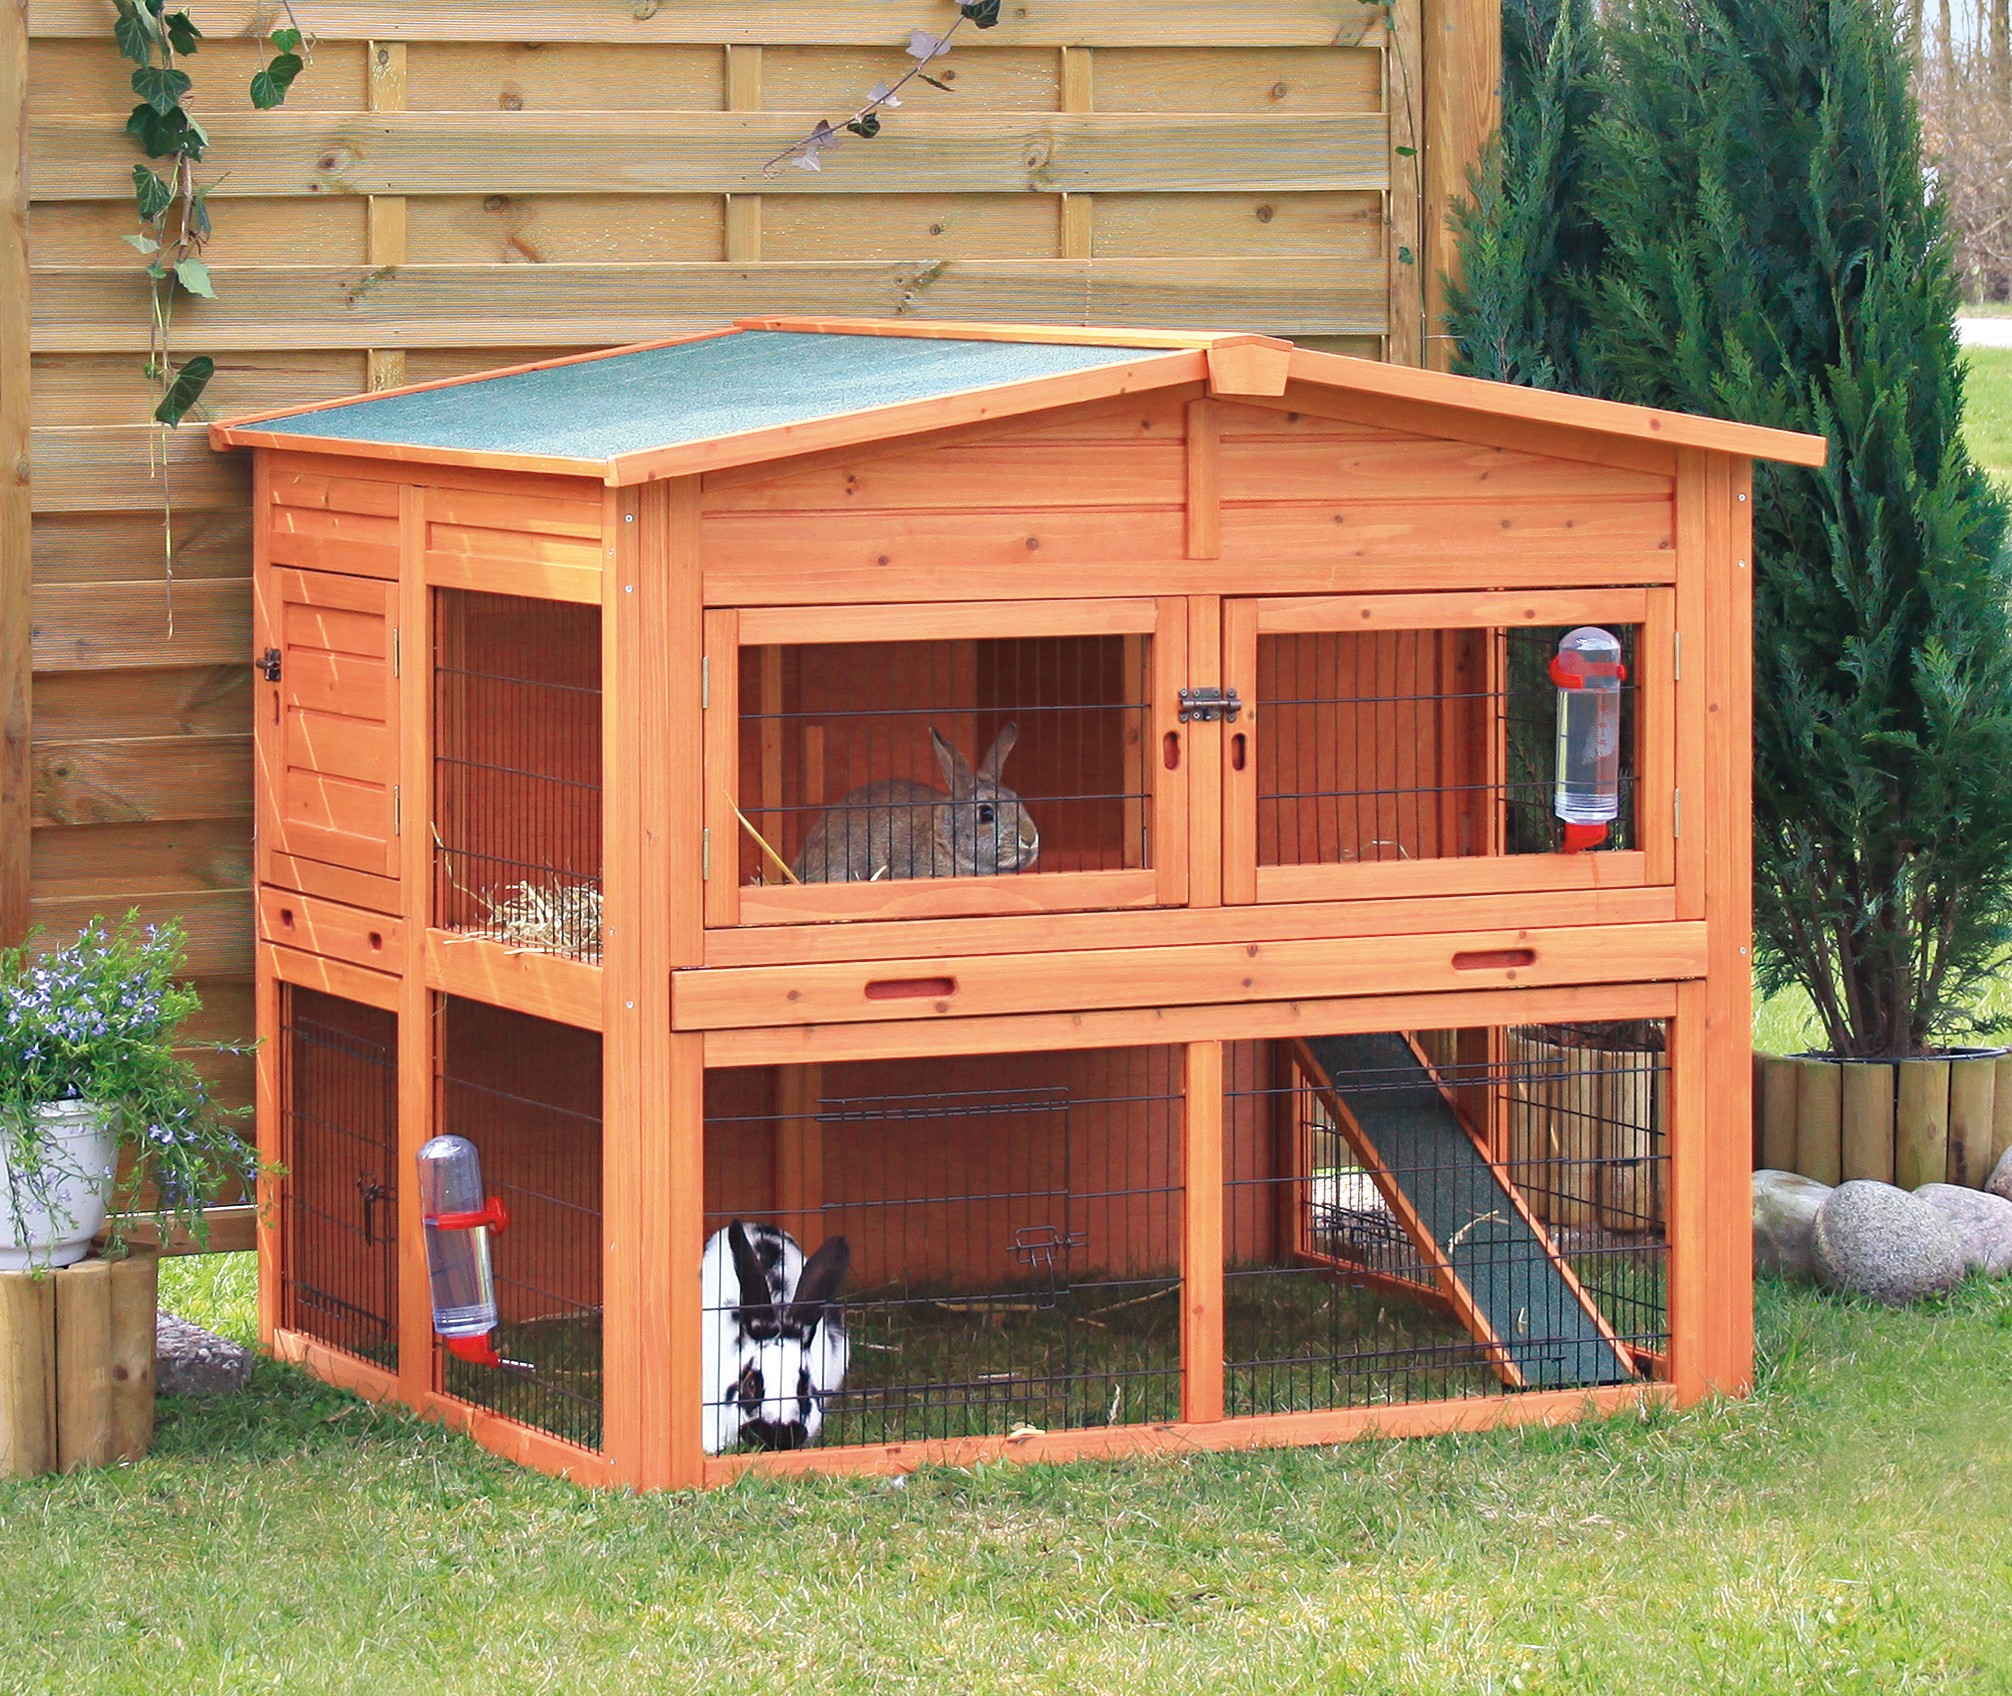 TRIXIE Deluxe Weatherproof Outdoor 2-Story Large Wooden Small Animal Hutch, Run, Tray, Brown - image 2 of 7